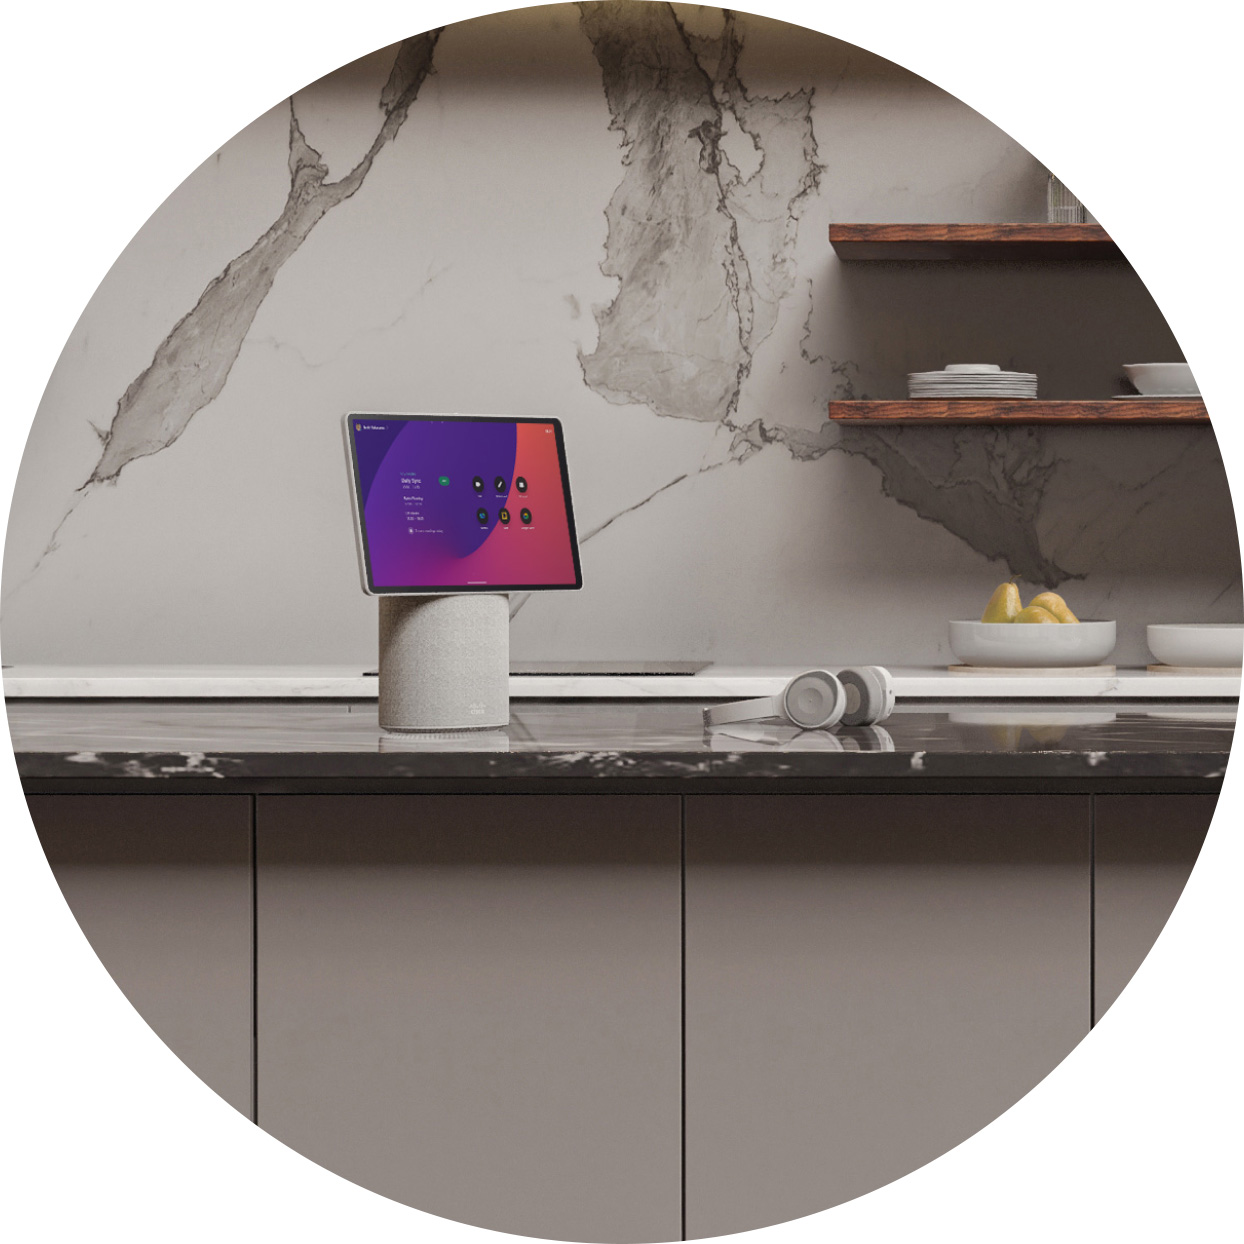 A Webex Desk Mini and a headset rest on the counter of a modern kitchen, replete with faux marble surfaces and minimalist cabinetry.